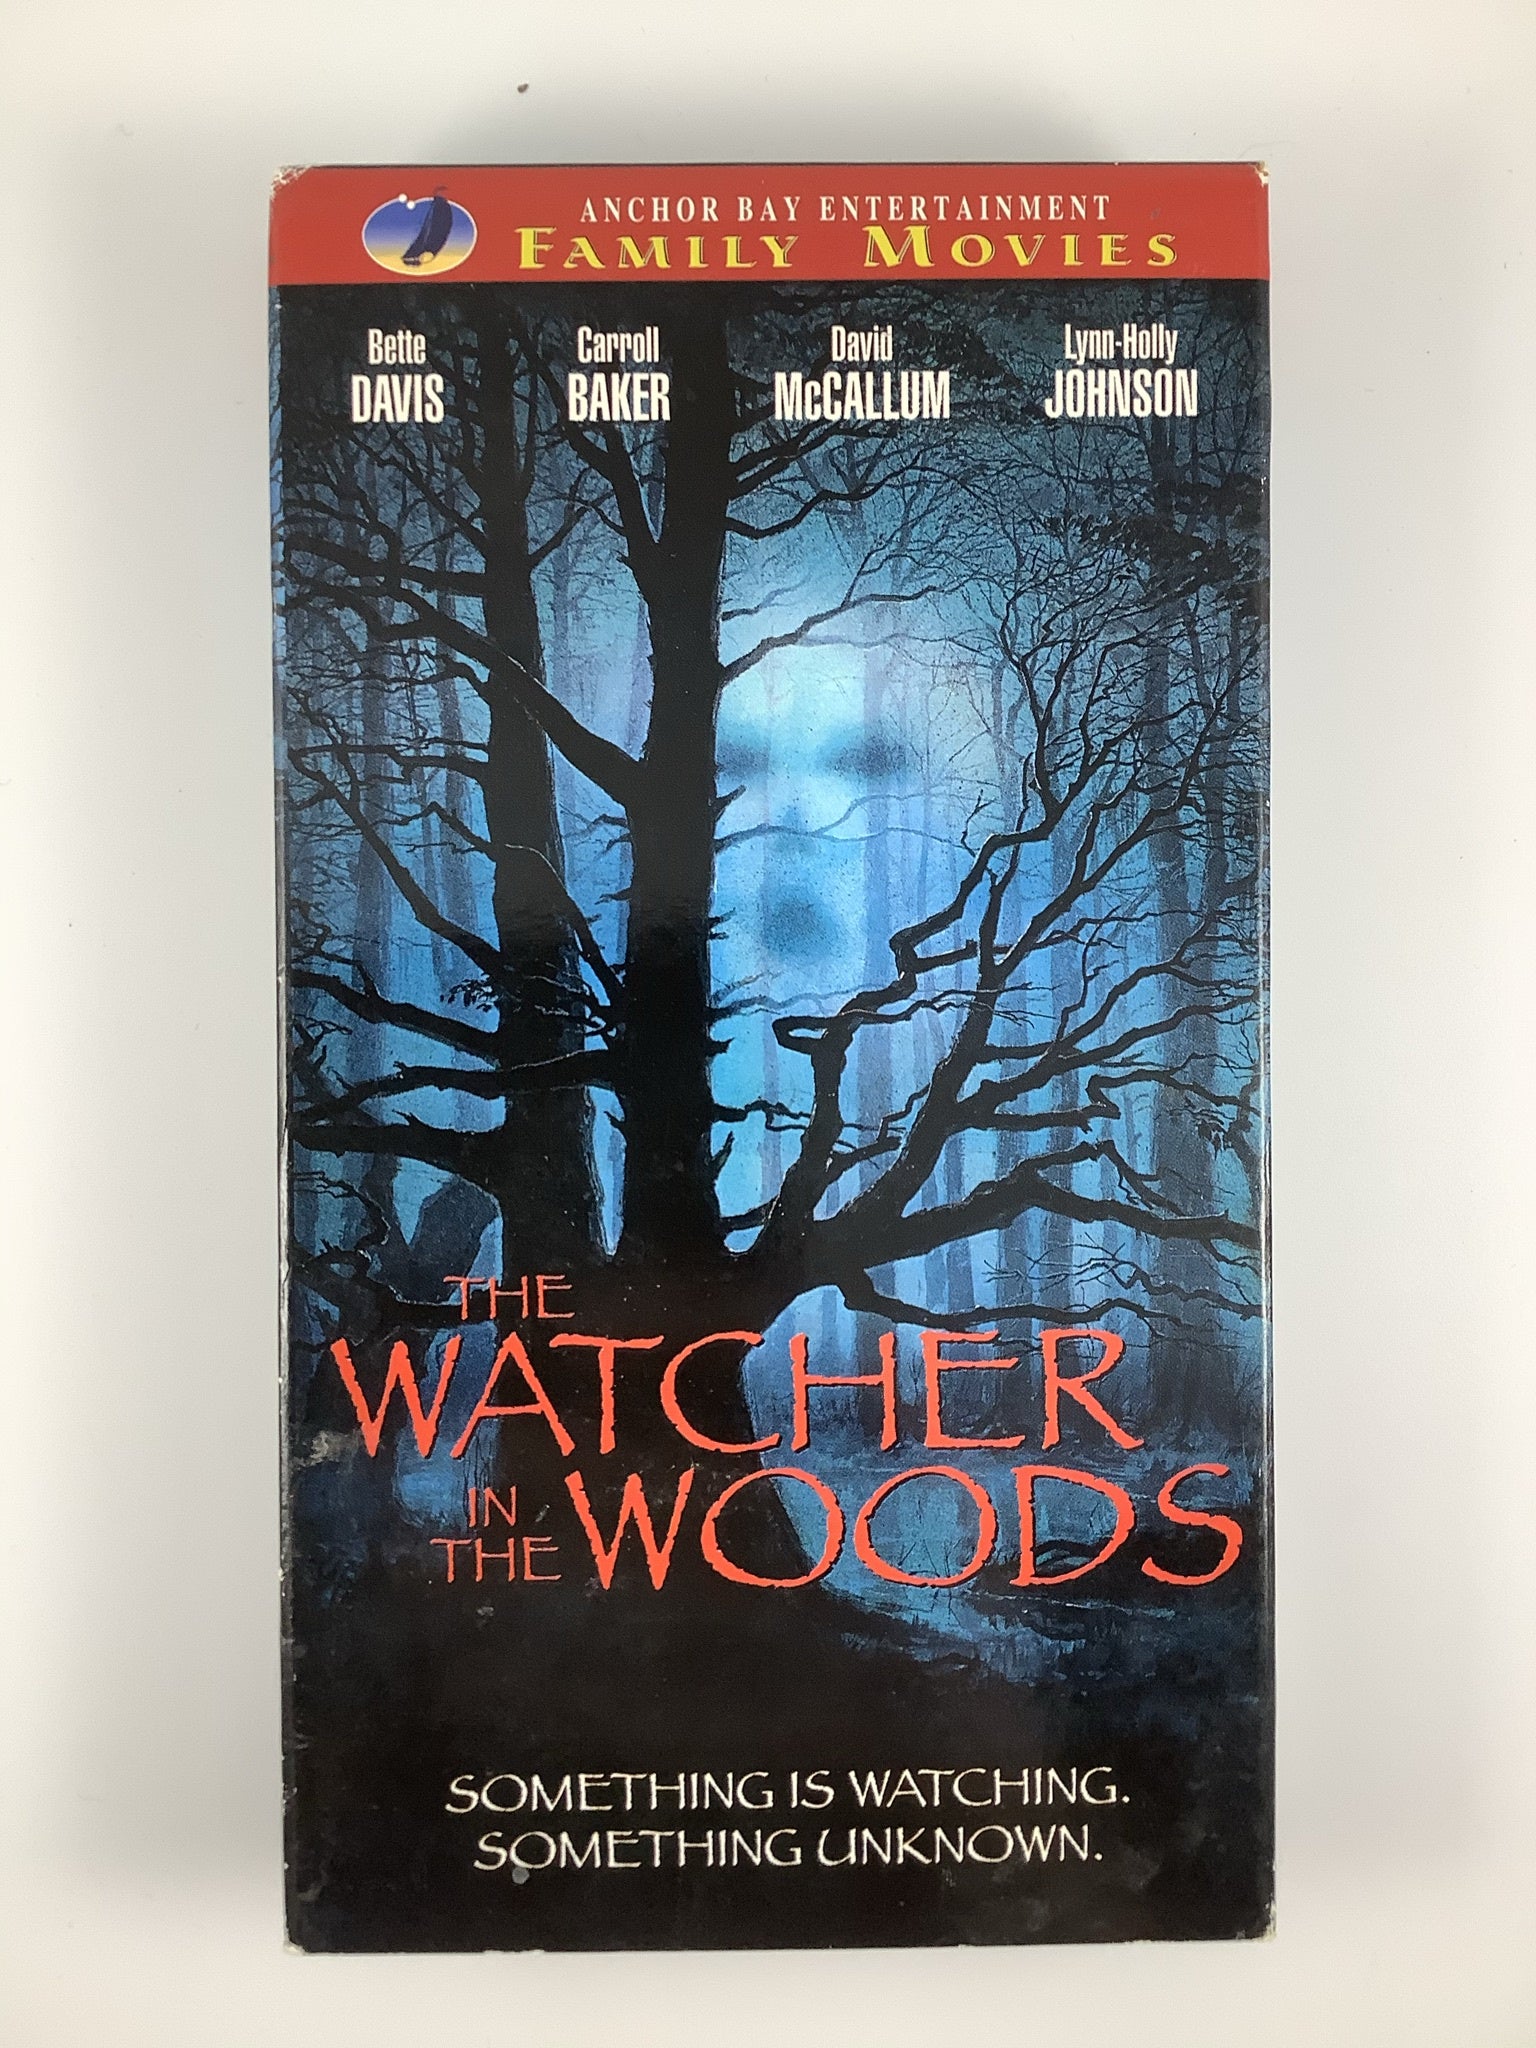 THE WATCHER IN THE WOODS (2017) Available on DVD September 11th